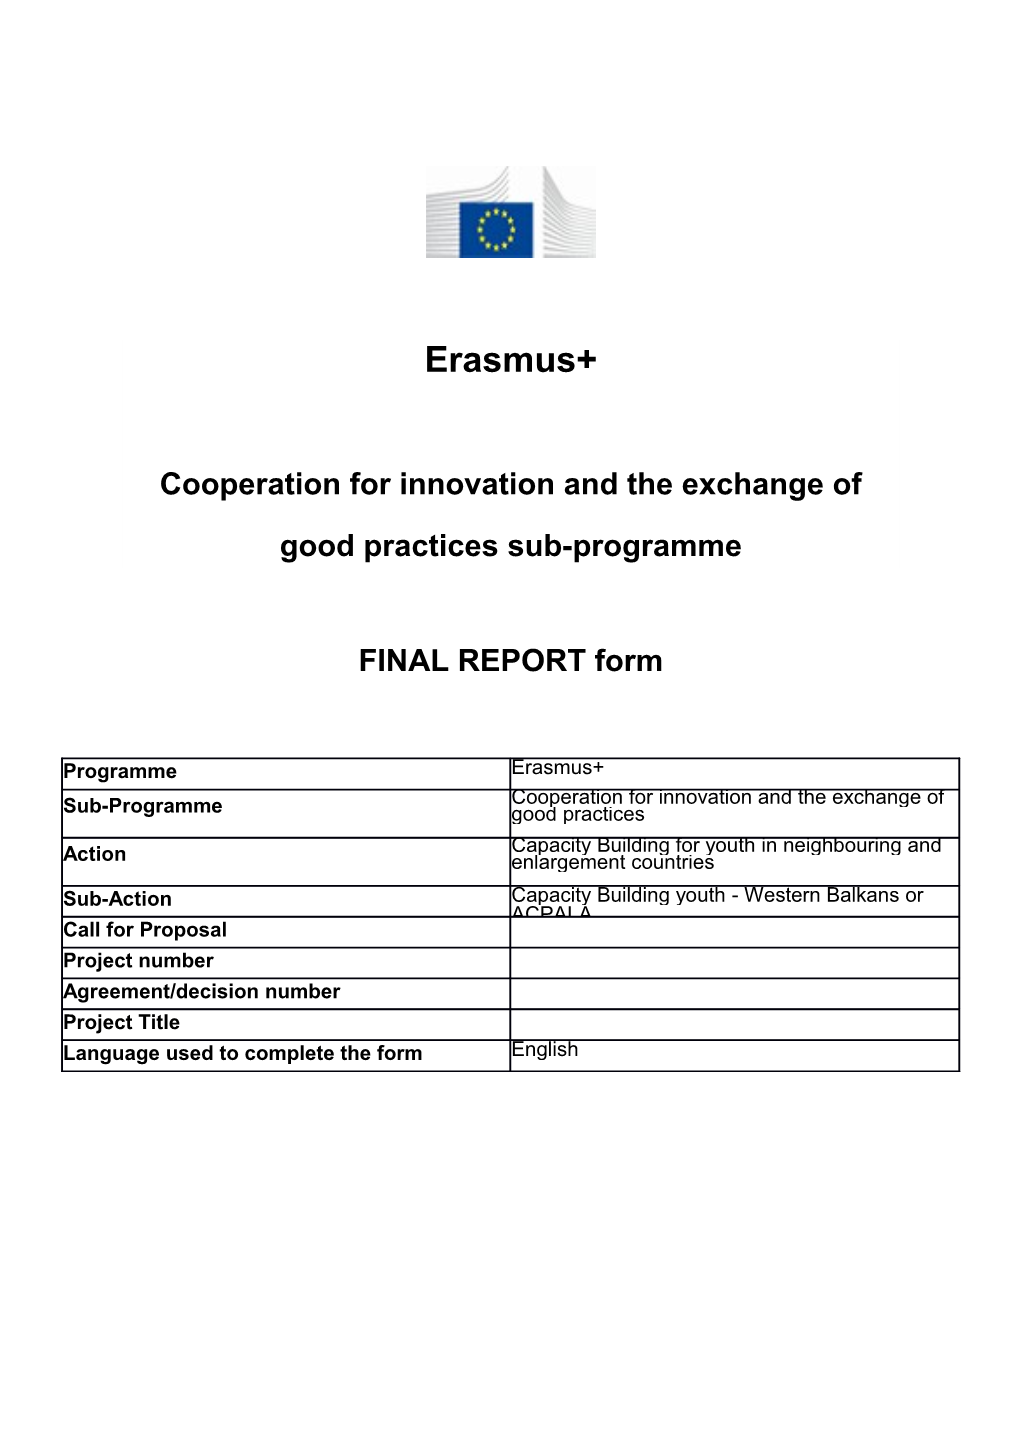 Cooperation for Innovation and the Exchange of Good Practices Sub-Programme